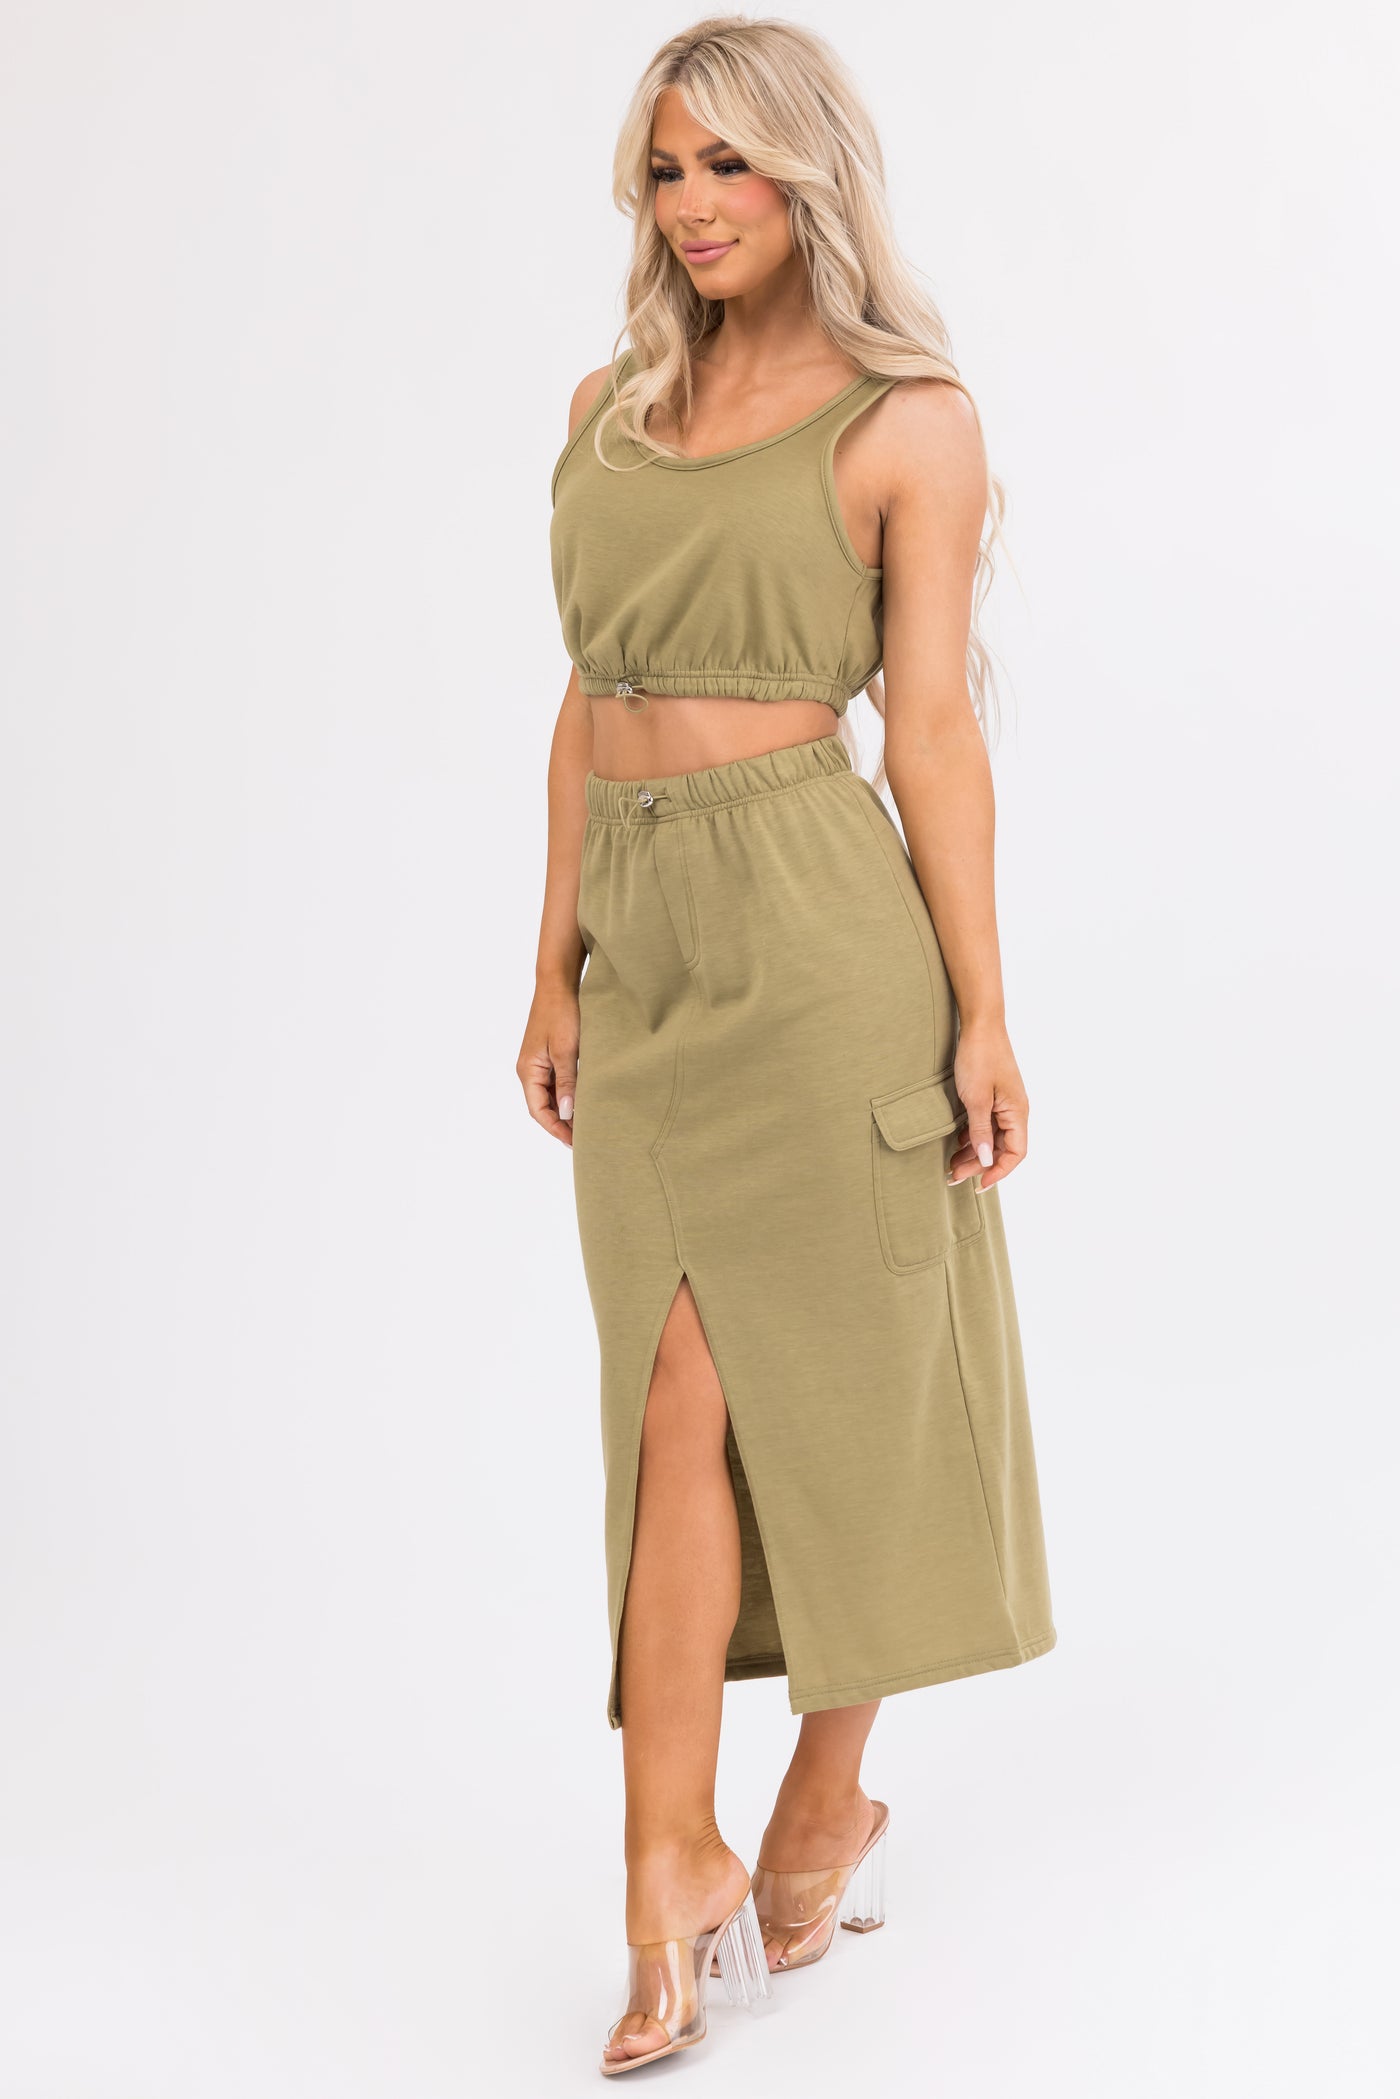 Olive Crop Top and Cargo Skirt Set